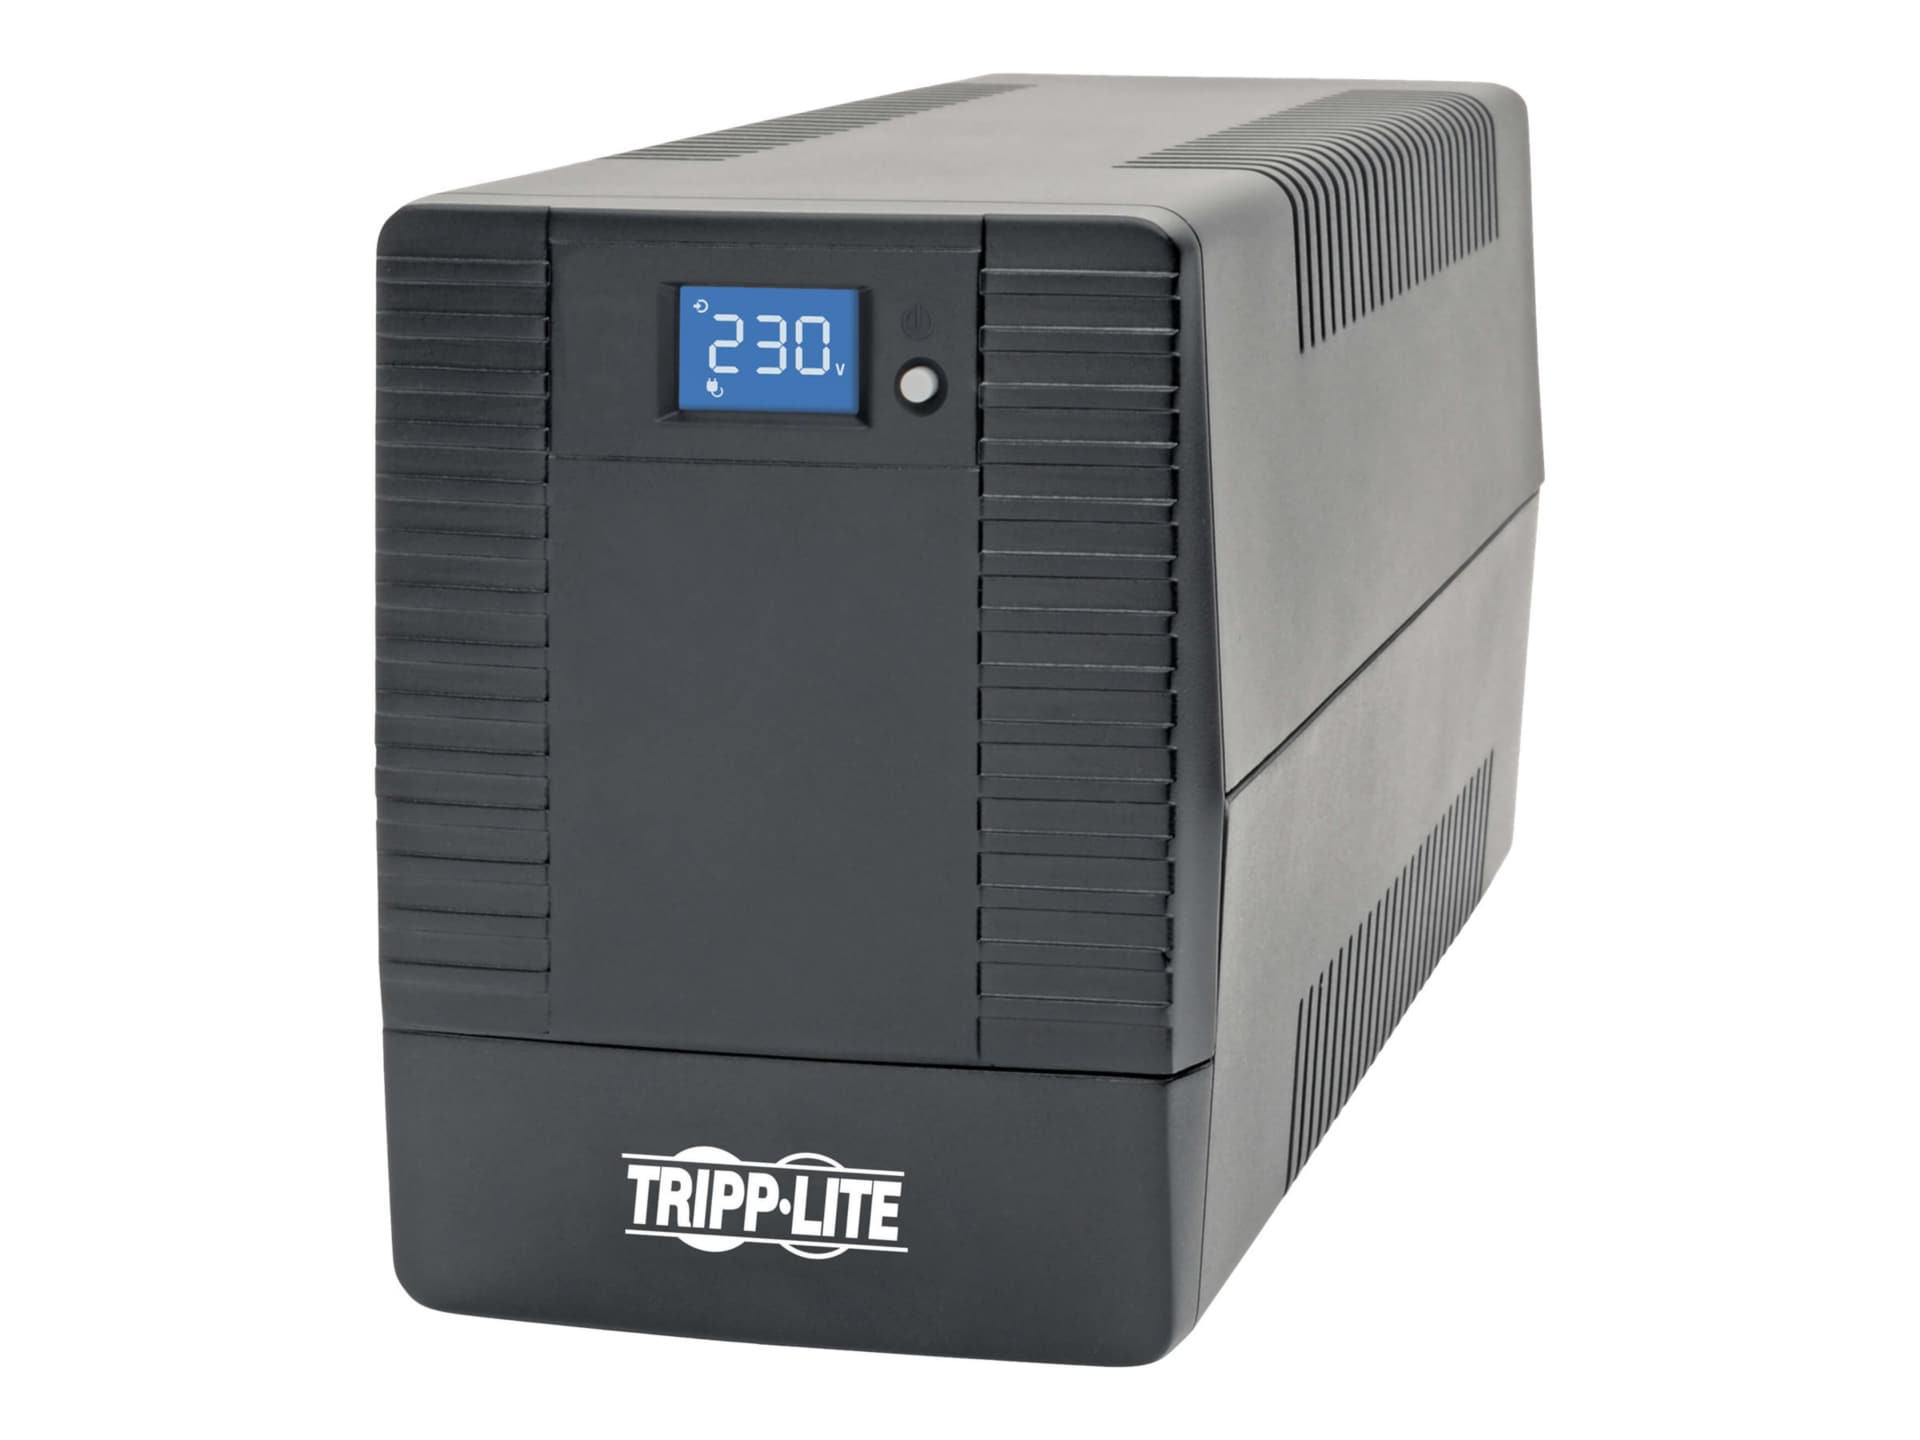 Tripp Lite 1000VA 600W 230V Line-Interactive UPS - 8 C13 Outlets, 2 Australian Outlet Adapters, LCD, USB, Tower - UPS -